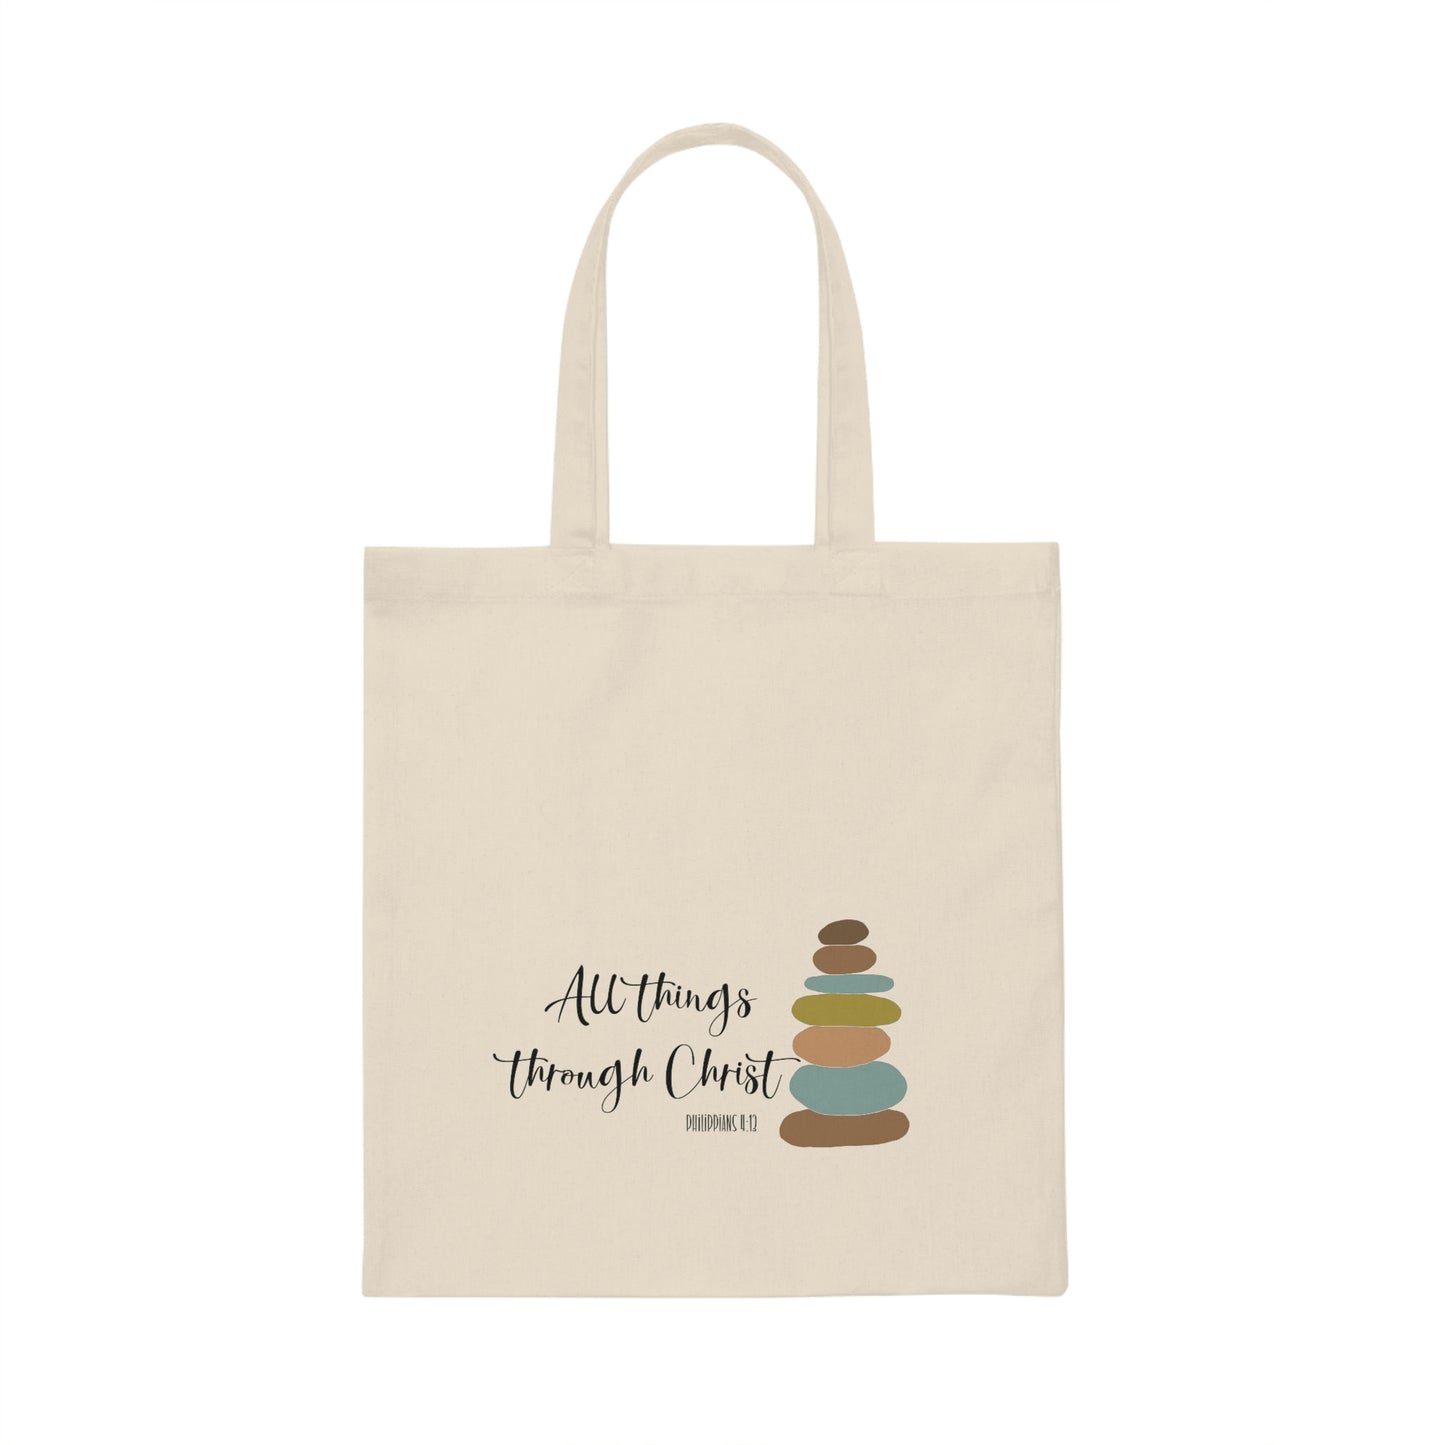 Canvas Tote Bag, All Things Through Christ, Philippians 4:13, Girl's Camp Bag